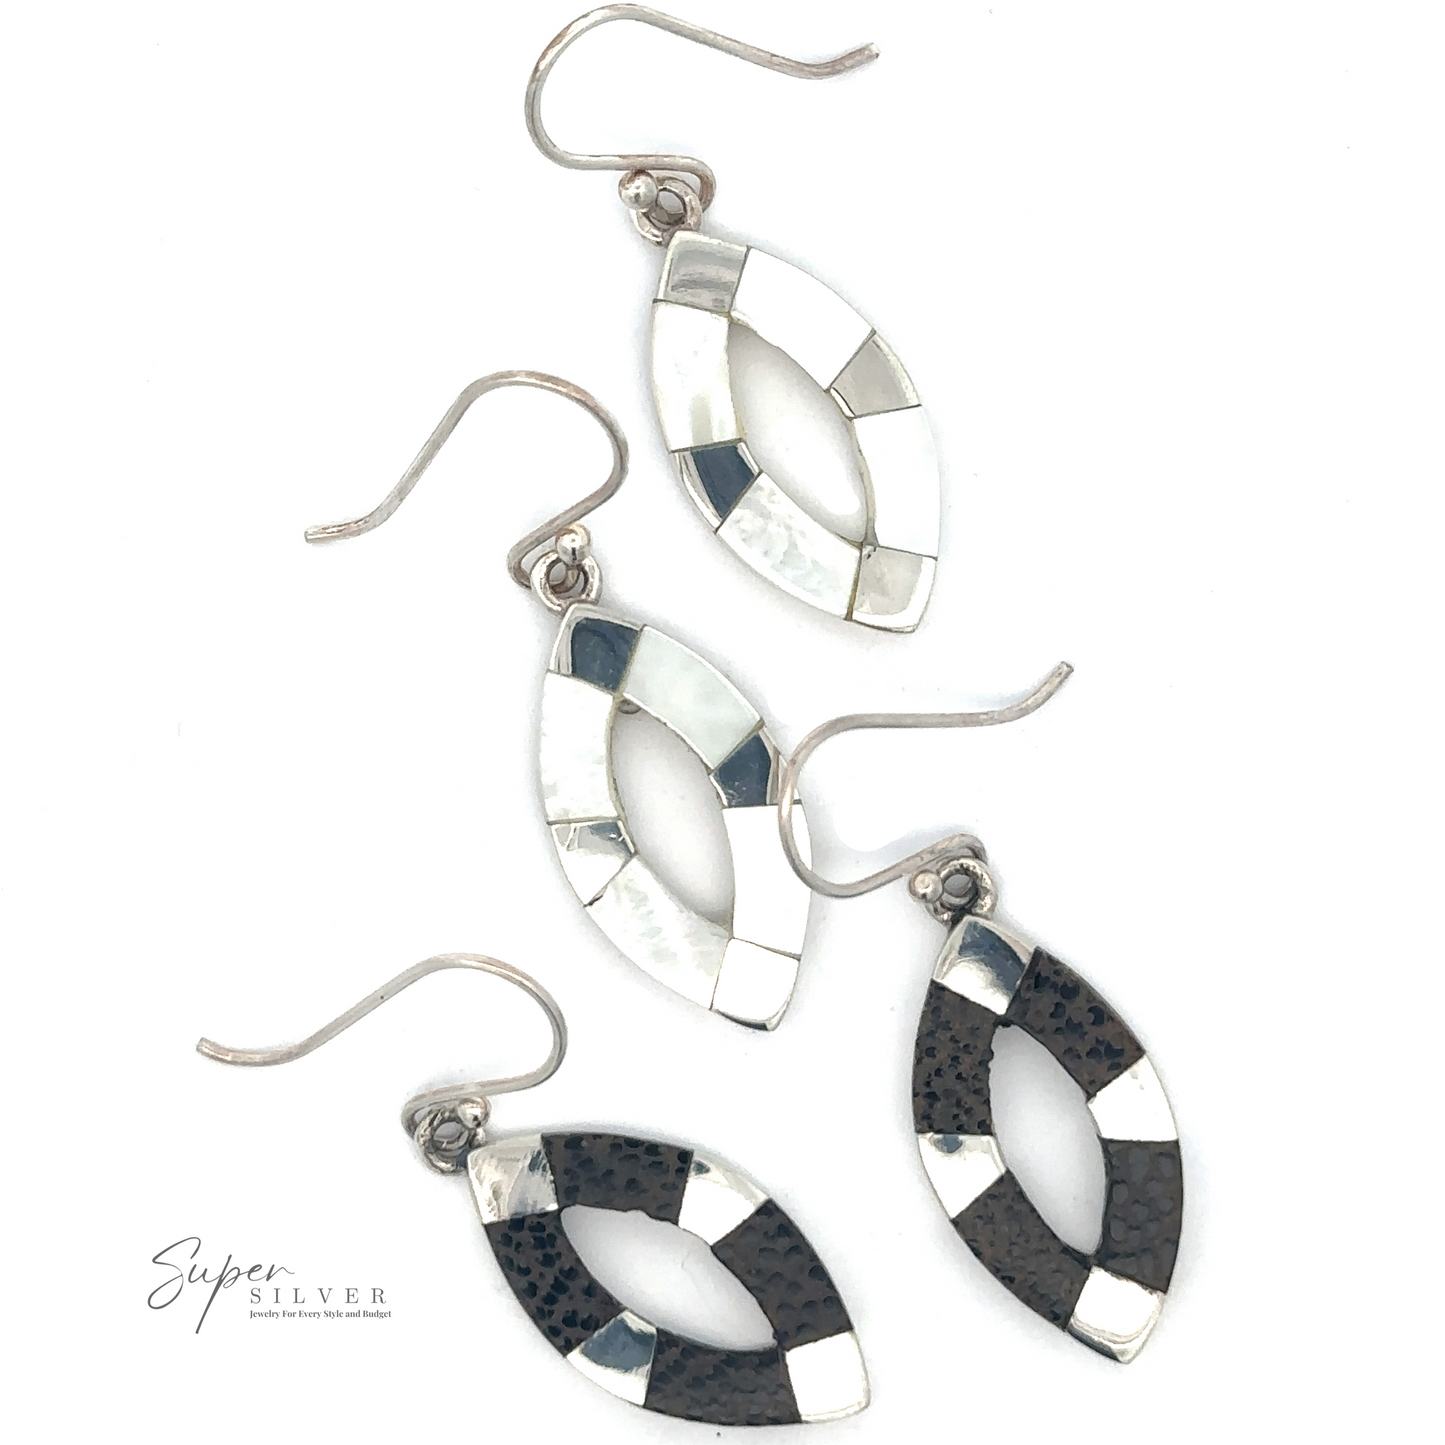 
                  
                    Two pairs of Inlaid Marquise Dangle Earrings, one with a white and silver mosaic pattern and the other with a black and silver mosaic pattern, laid on a white surface.
                  
                